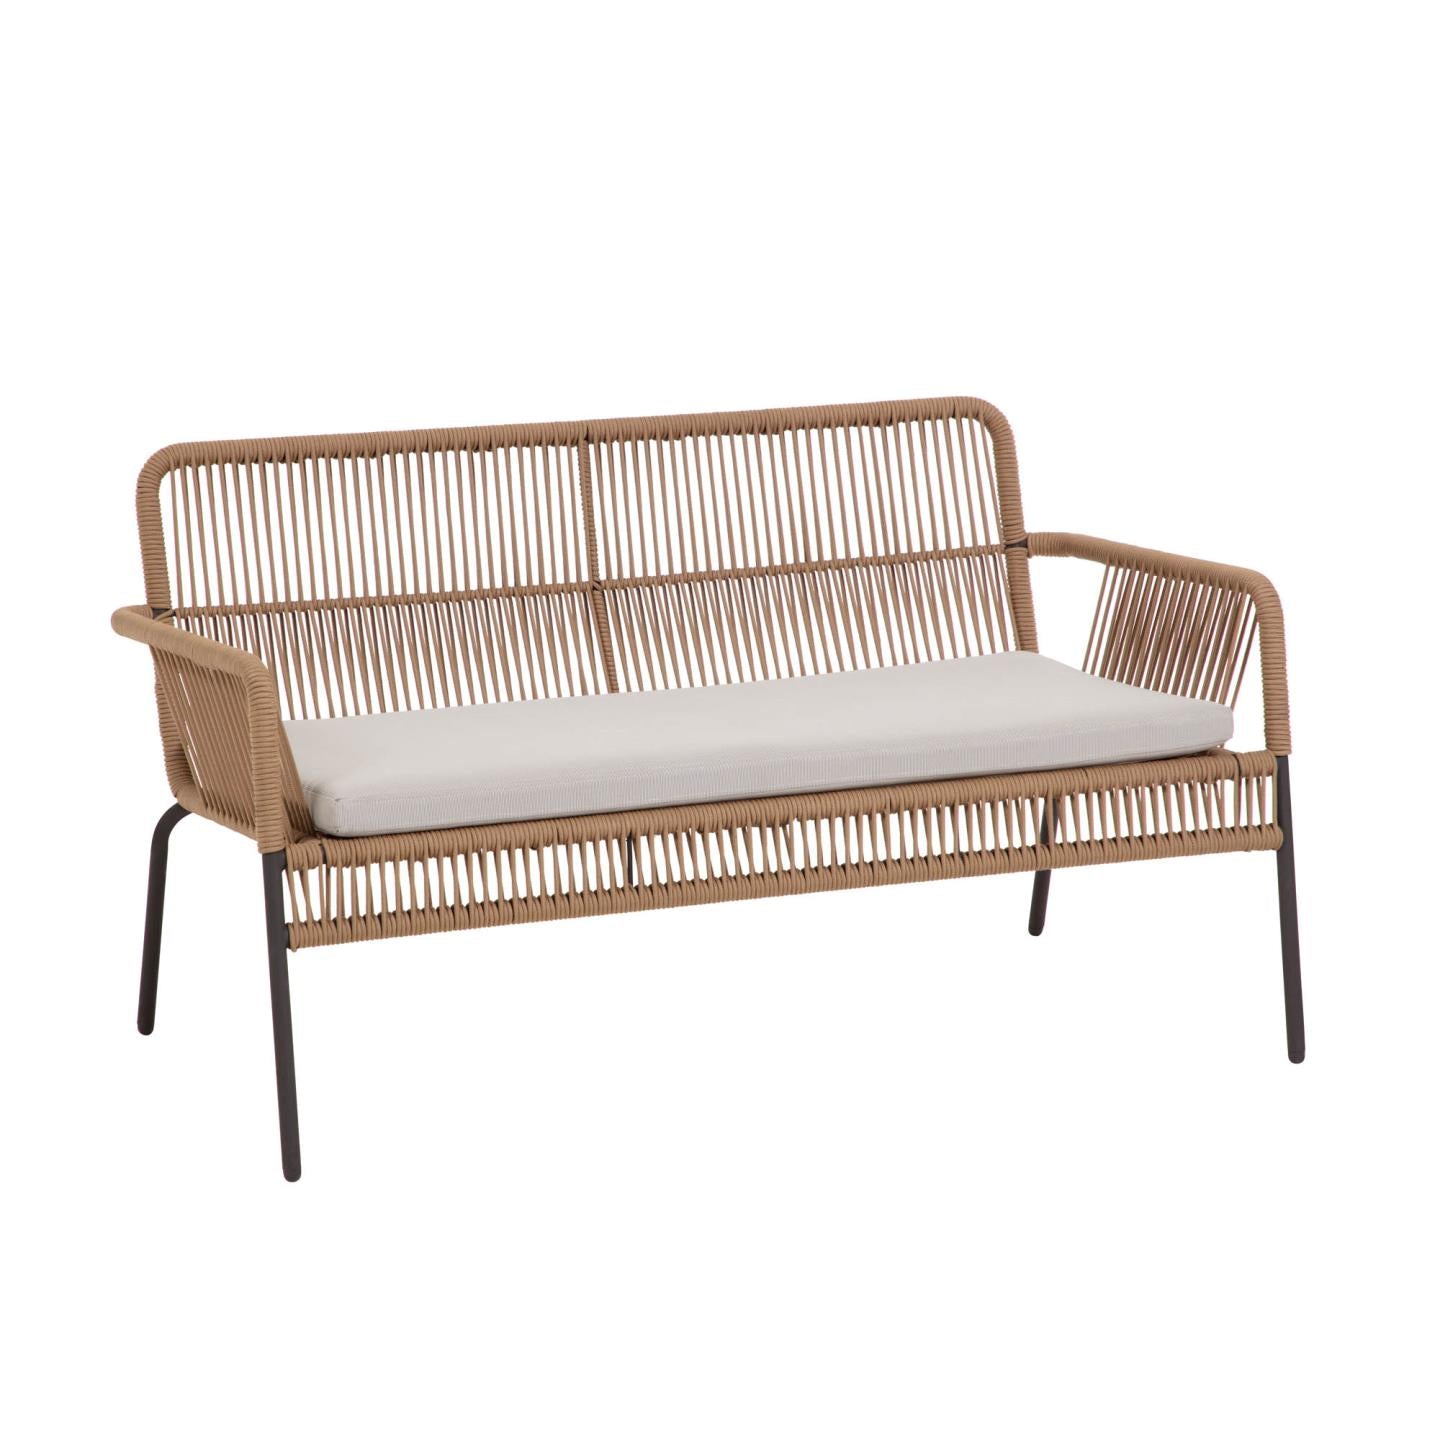 Samanta 2 seater stackable sofa in beige cord, 133 cm